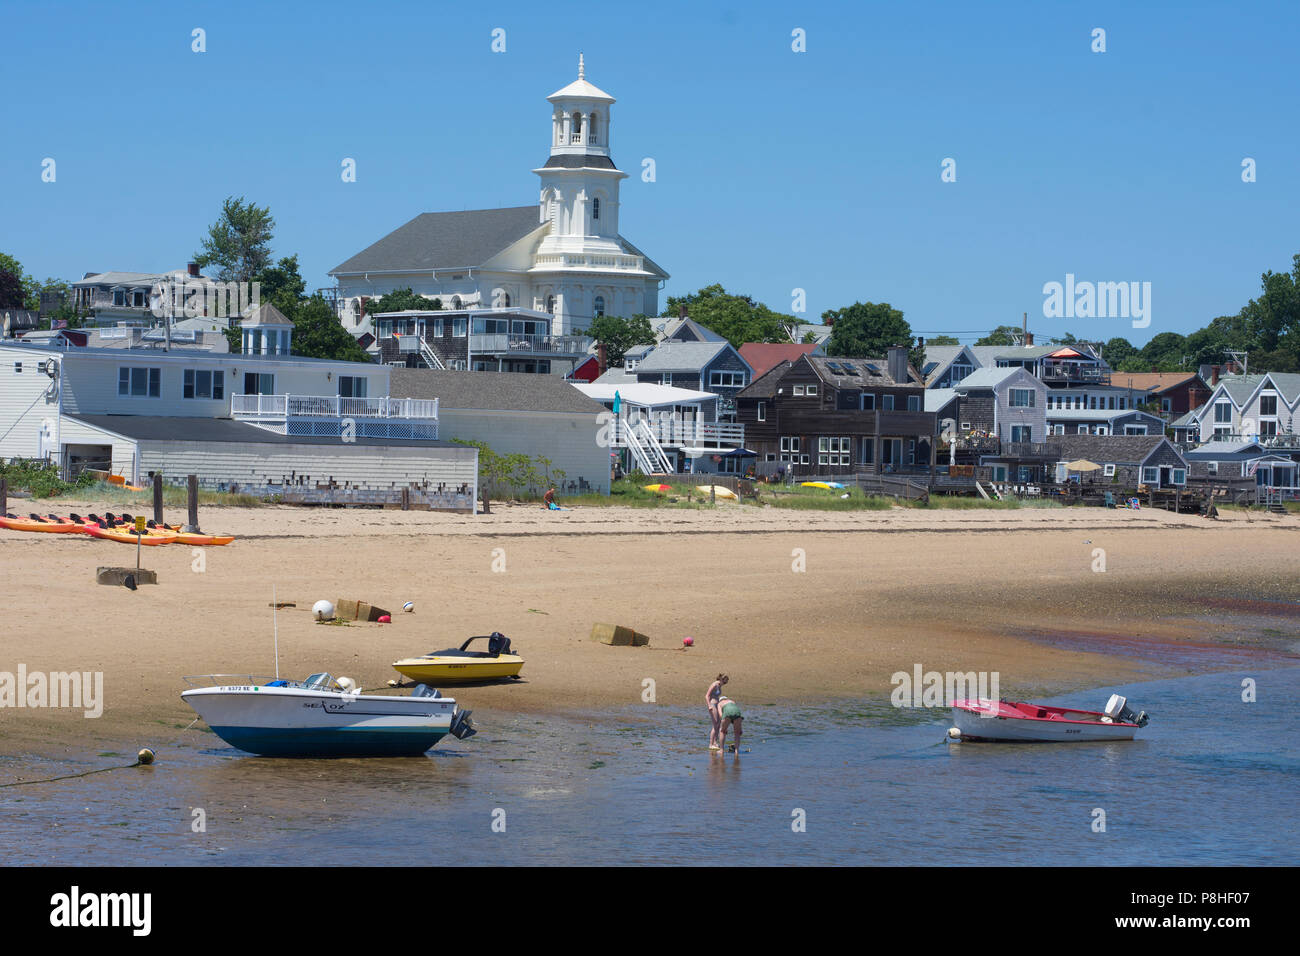 The waterfront of Provincetown, Massachusetts on Cape Cod, USA, at low tide. Stock Photo